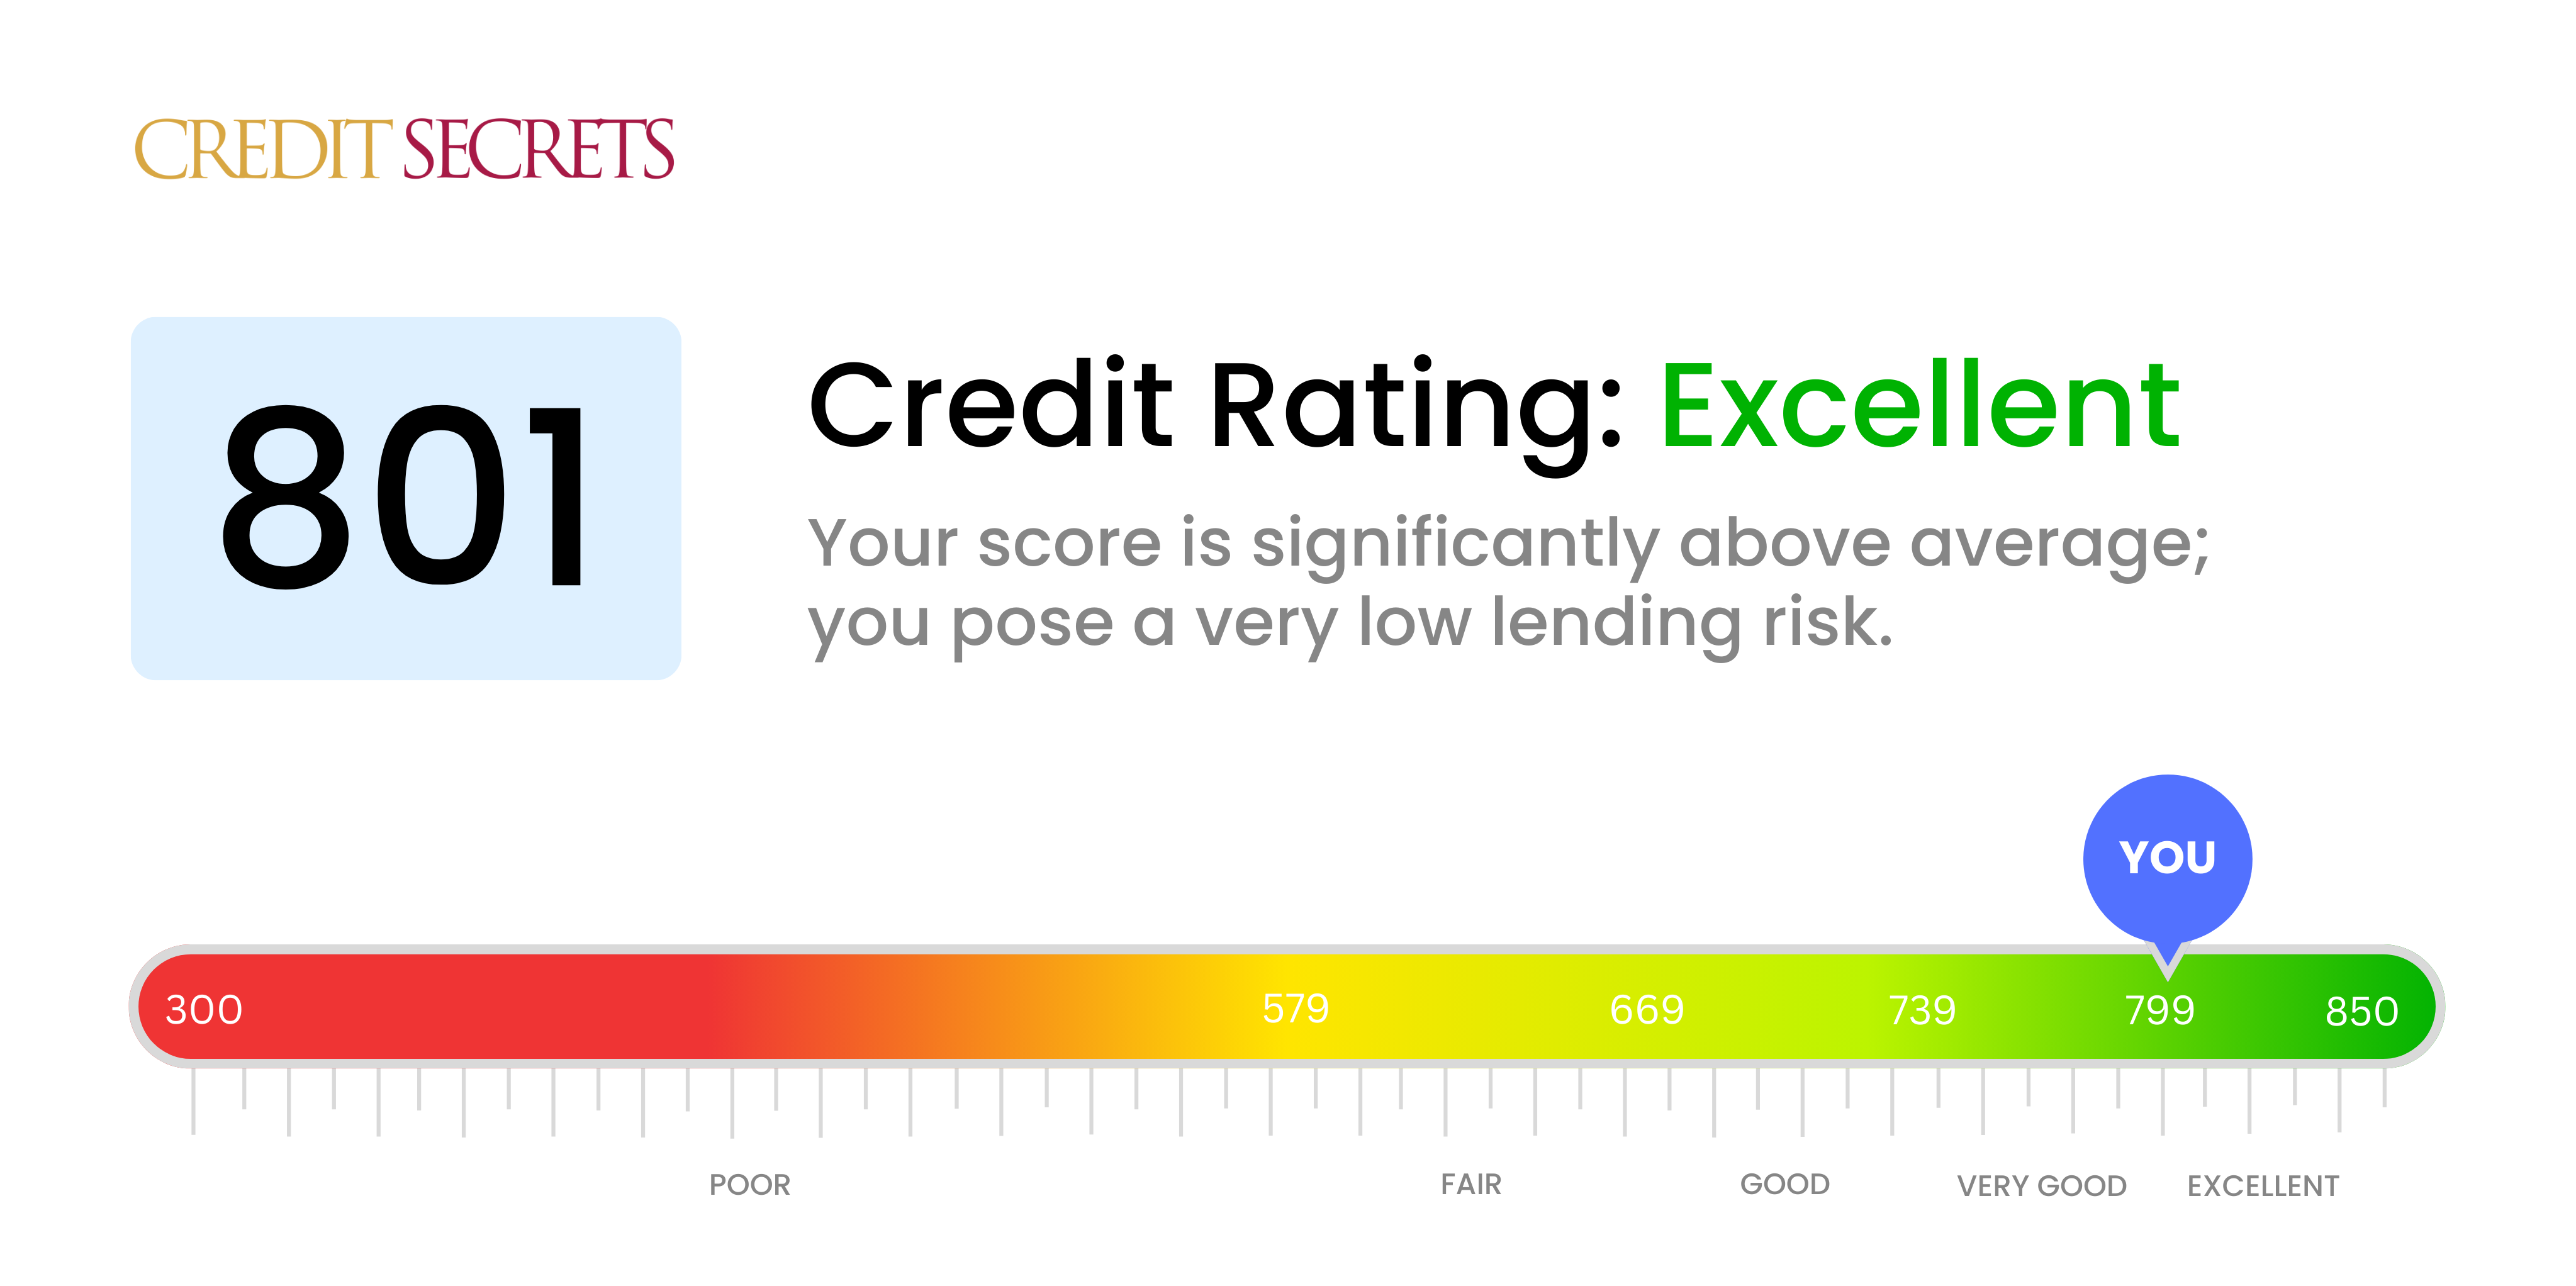 Is 801 a good credit score?